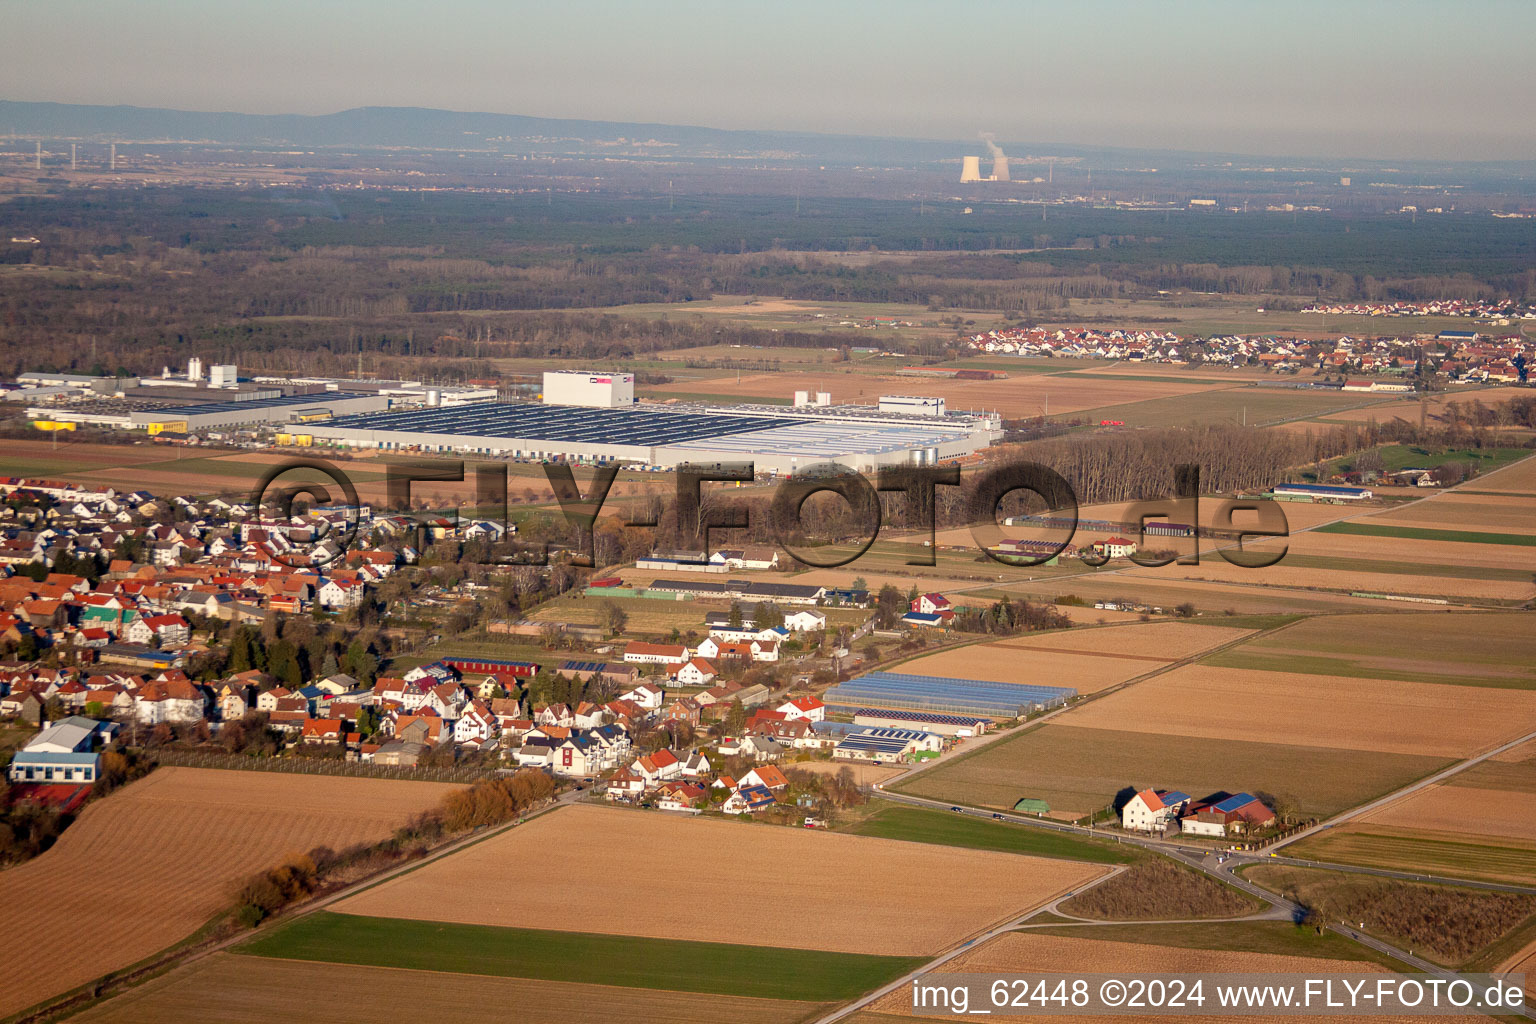 Offenbach an der Queich in the state Rhineland-Palatinate, Germany seen from above